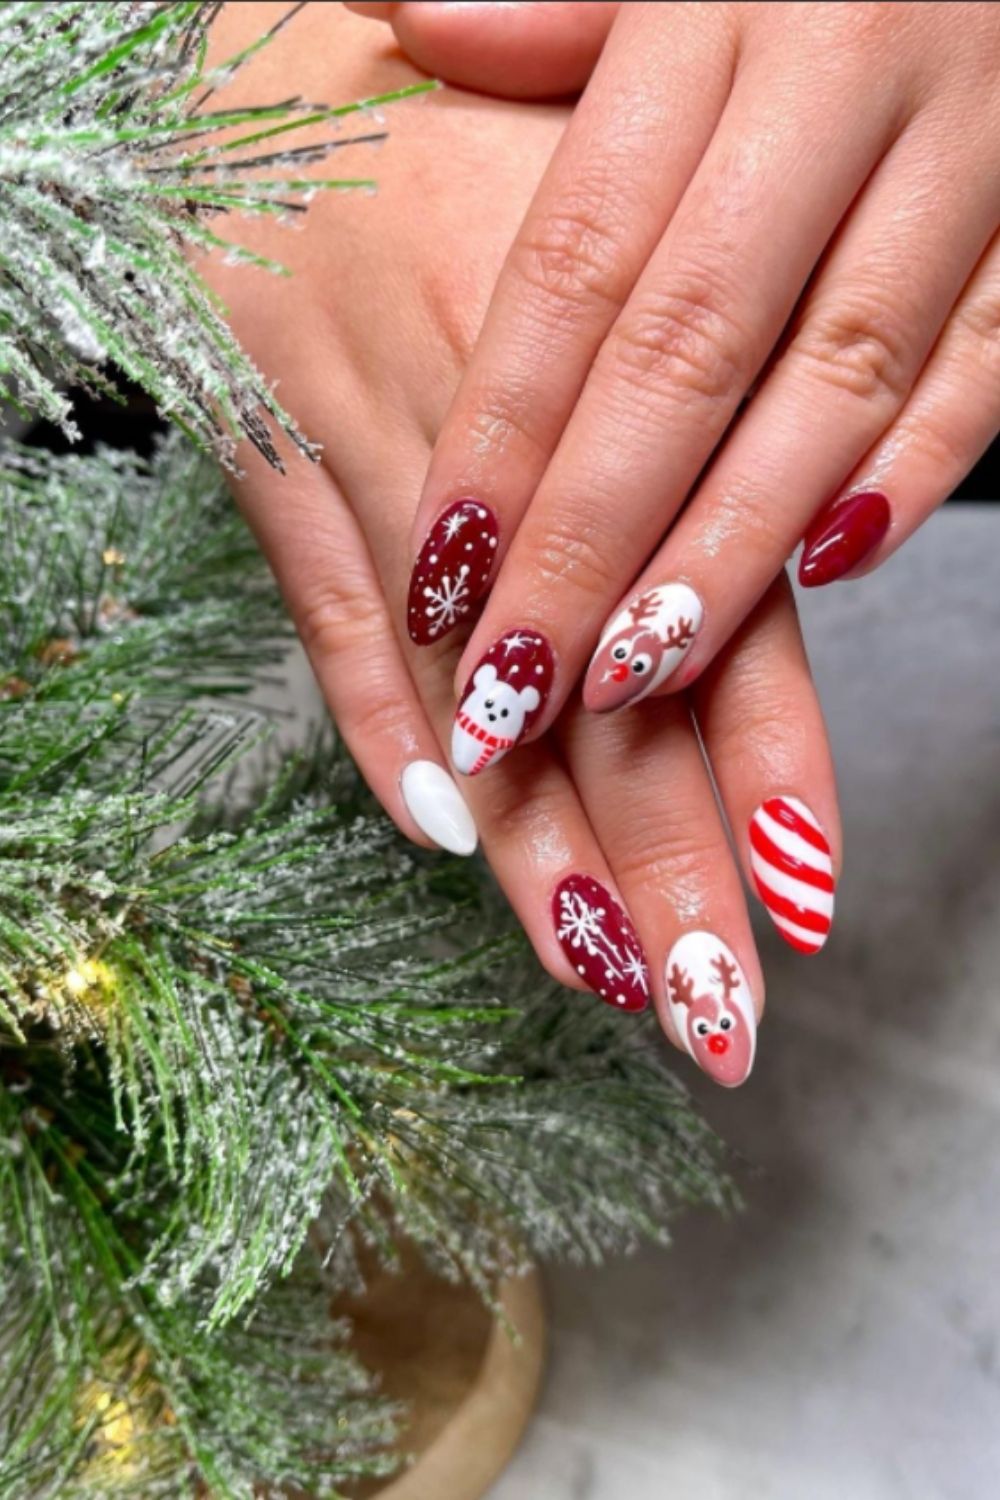 Short nails art with reindeer